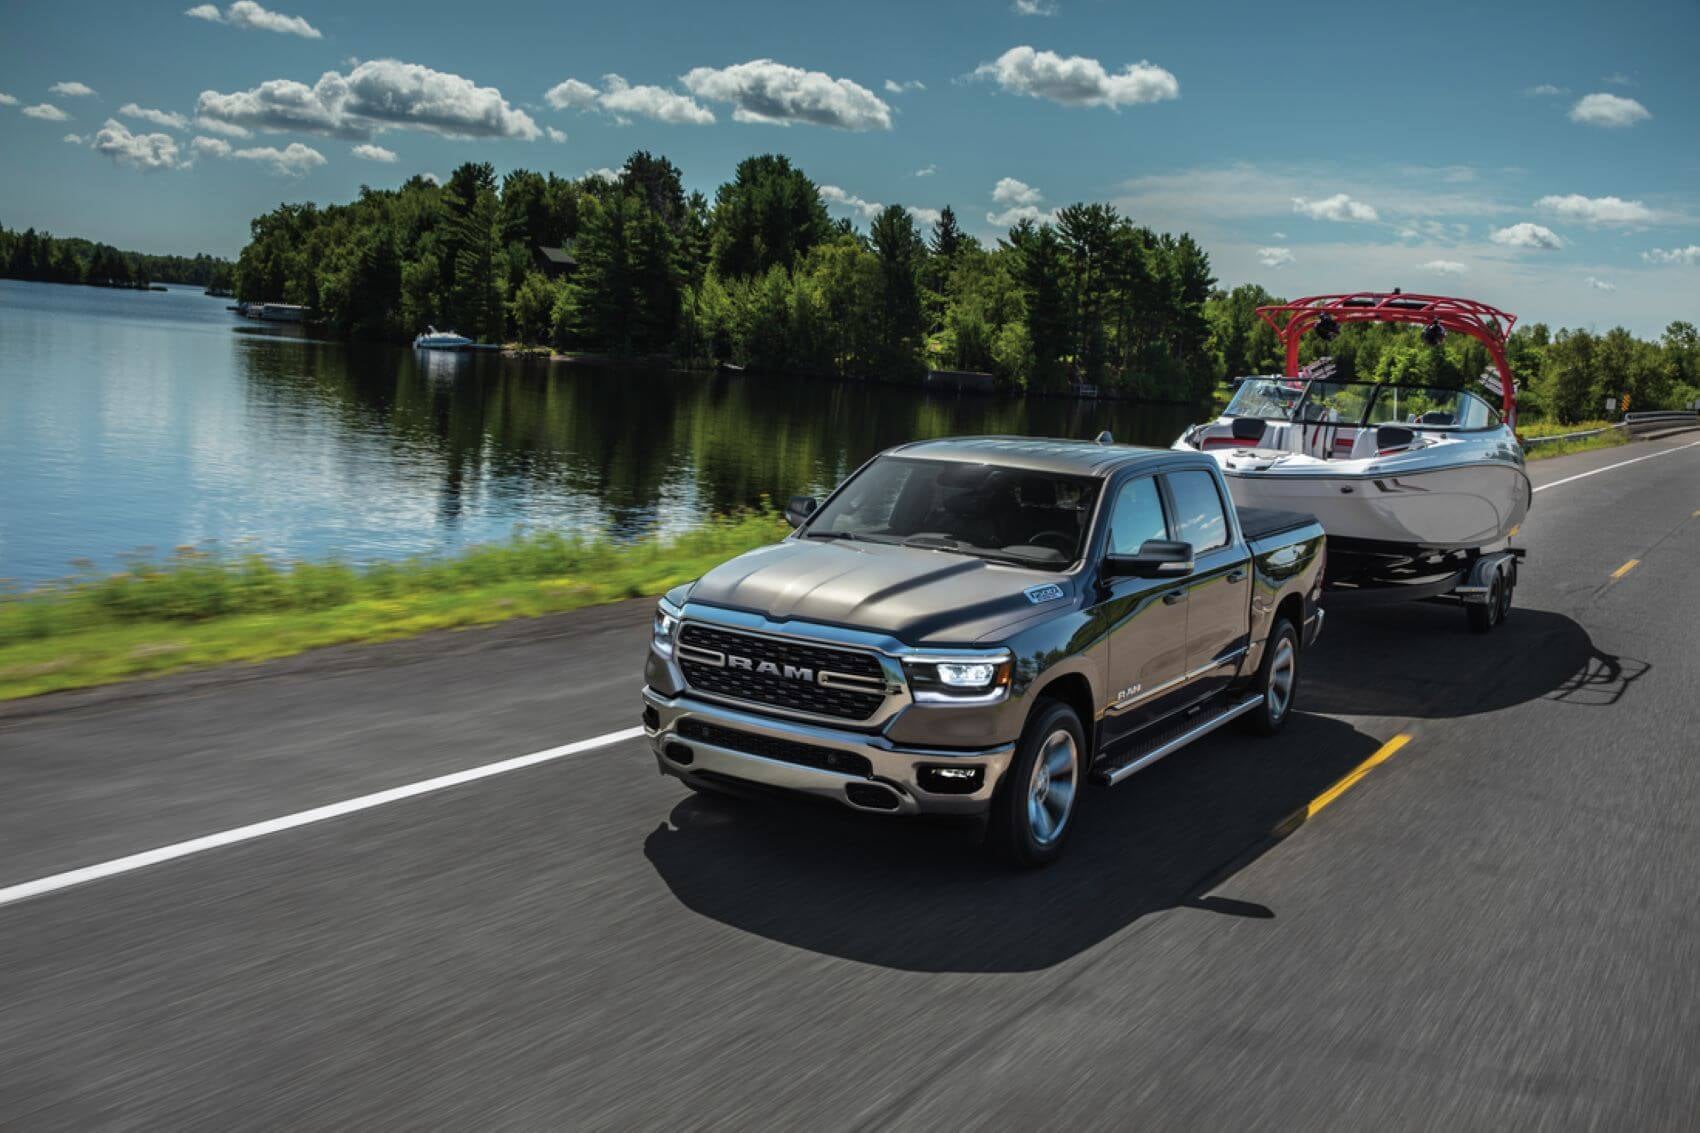 2022 RAM 1500 in Silver Towing